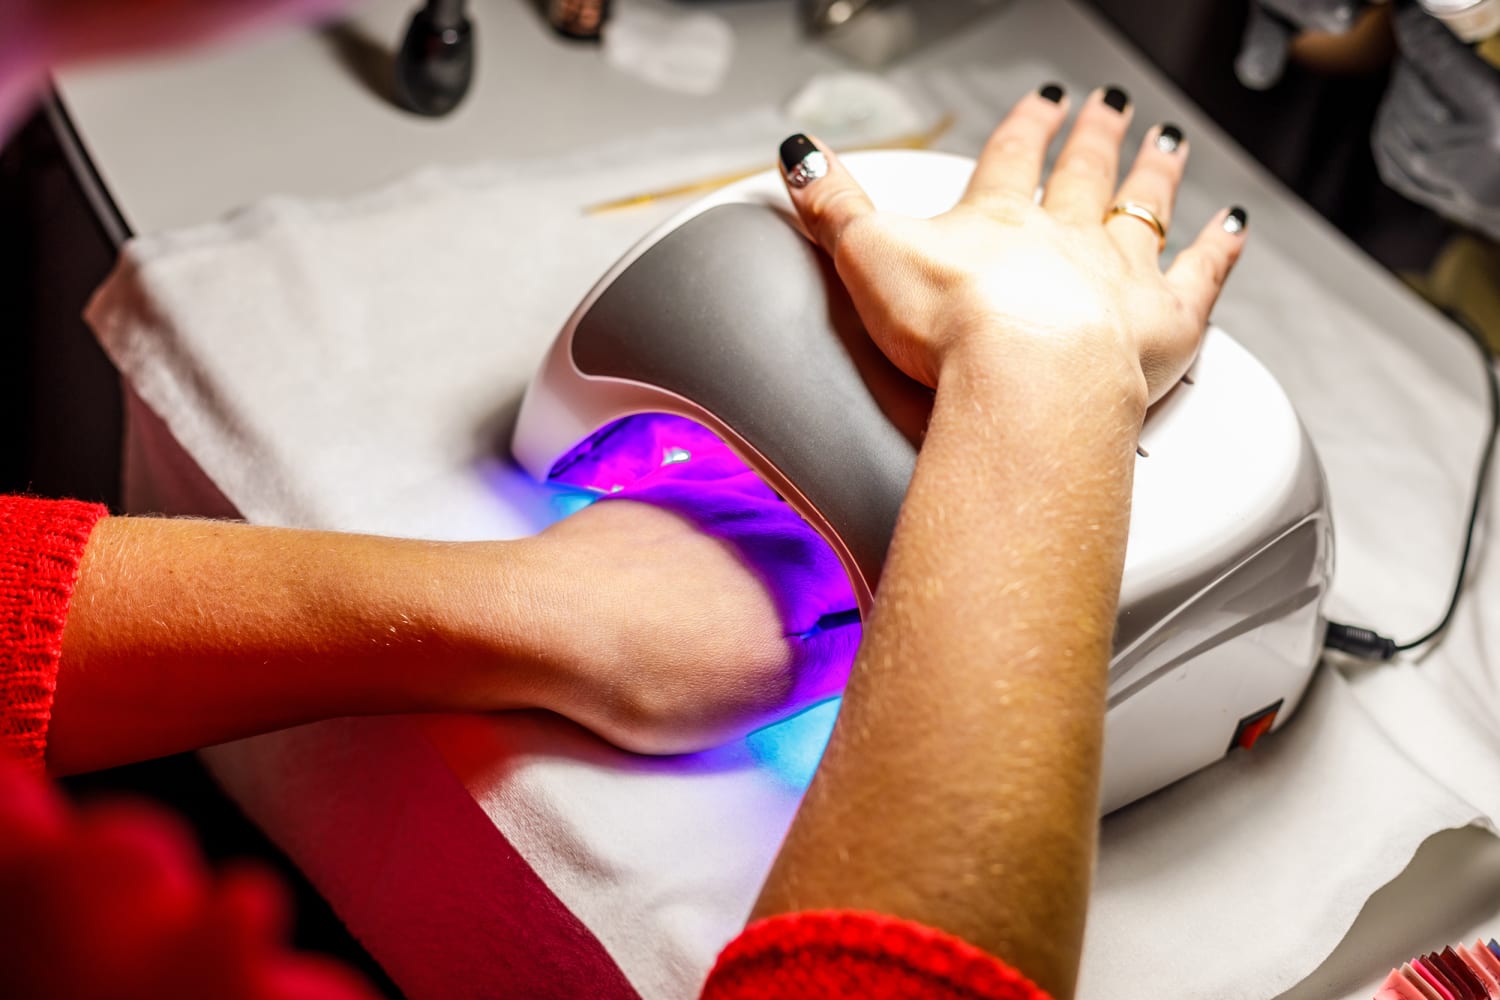 Dermatologists say they don't get gel manicures as research hints UV nail dryers may damage DNA